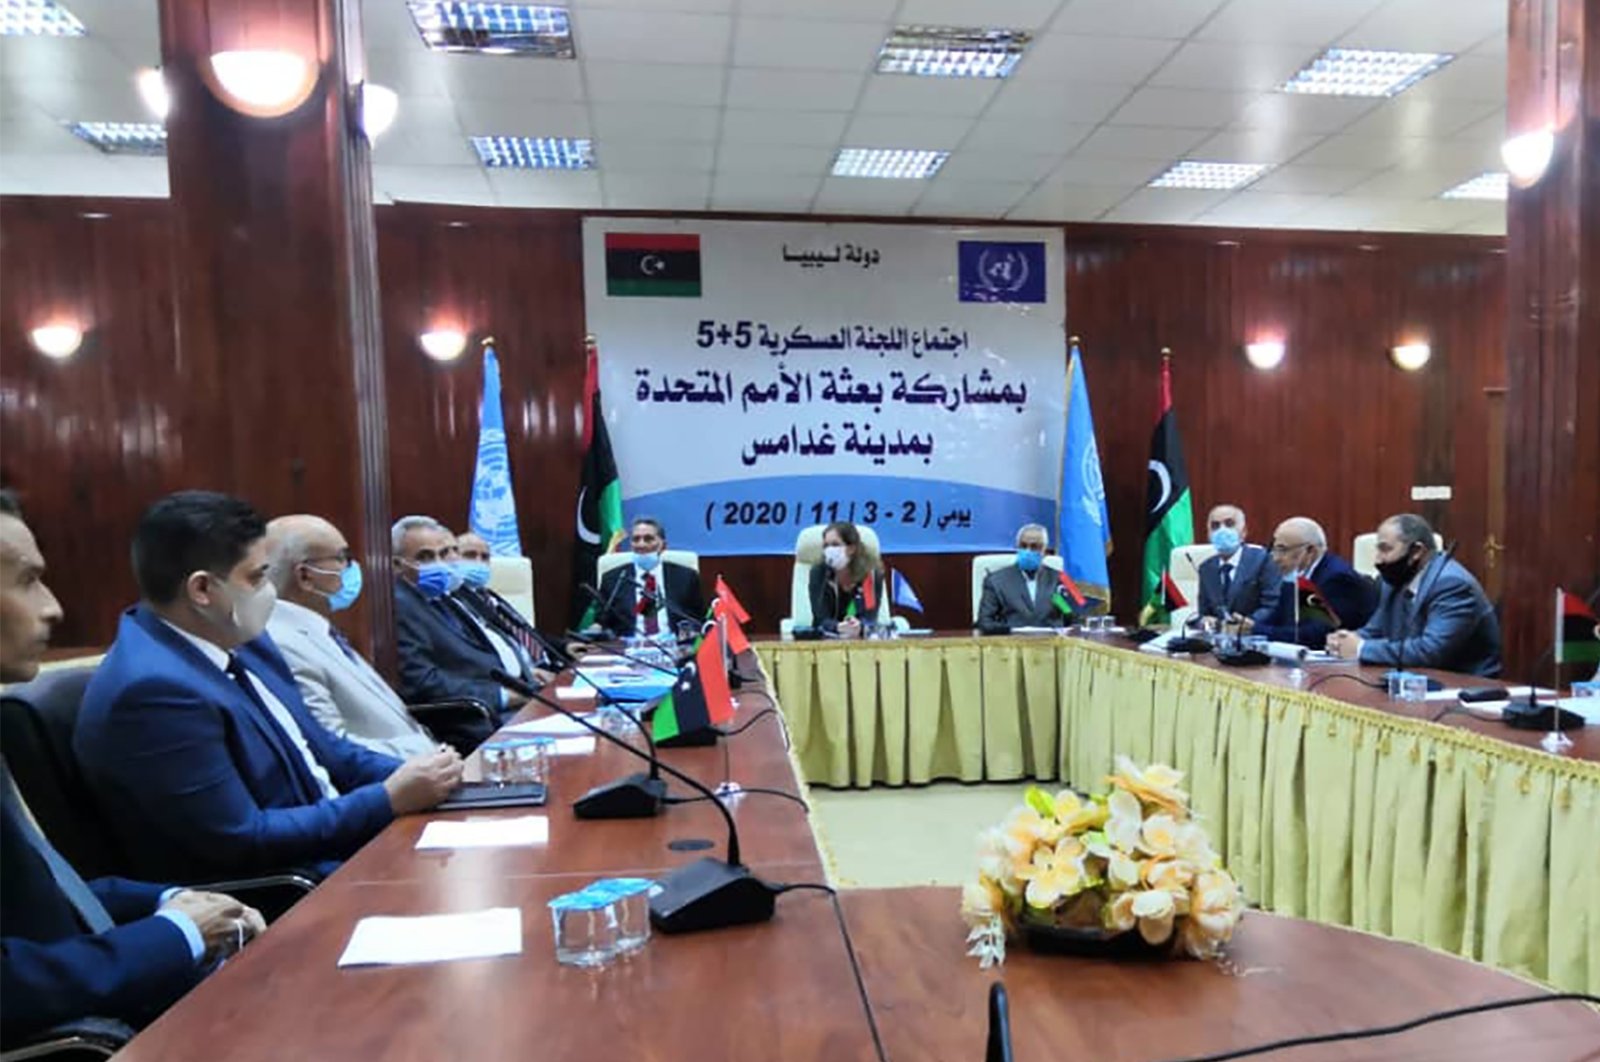 Members of a Libyan Joint Military Commission meet for talks in Ghadames, a desert oasis some 465 kilometers (290 miles) southwest of the capital Tripoli, Nov. 2, 2020. (AFP Photo)